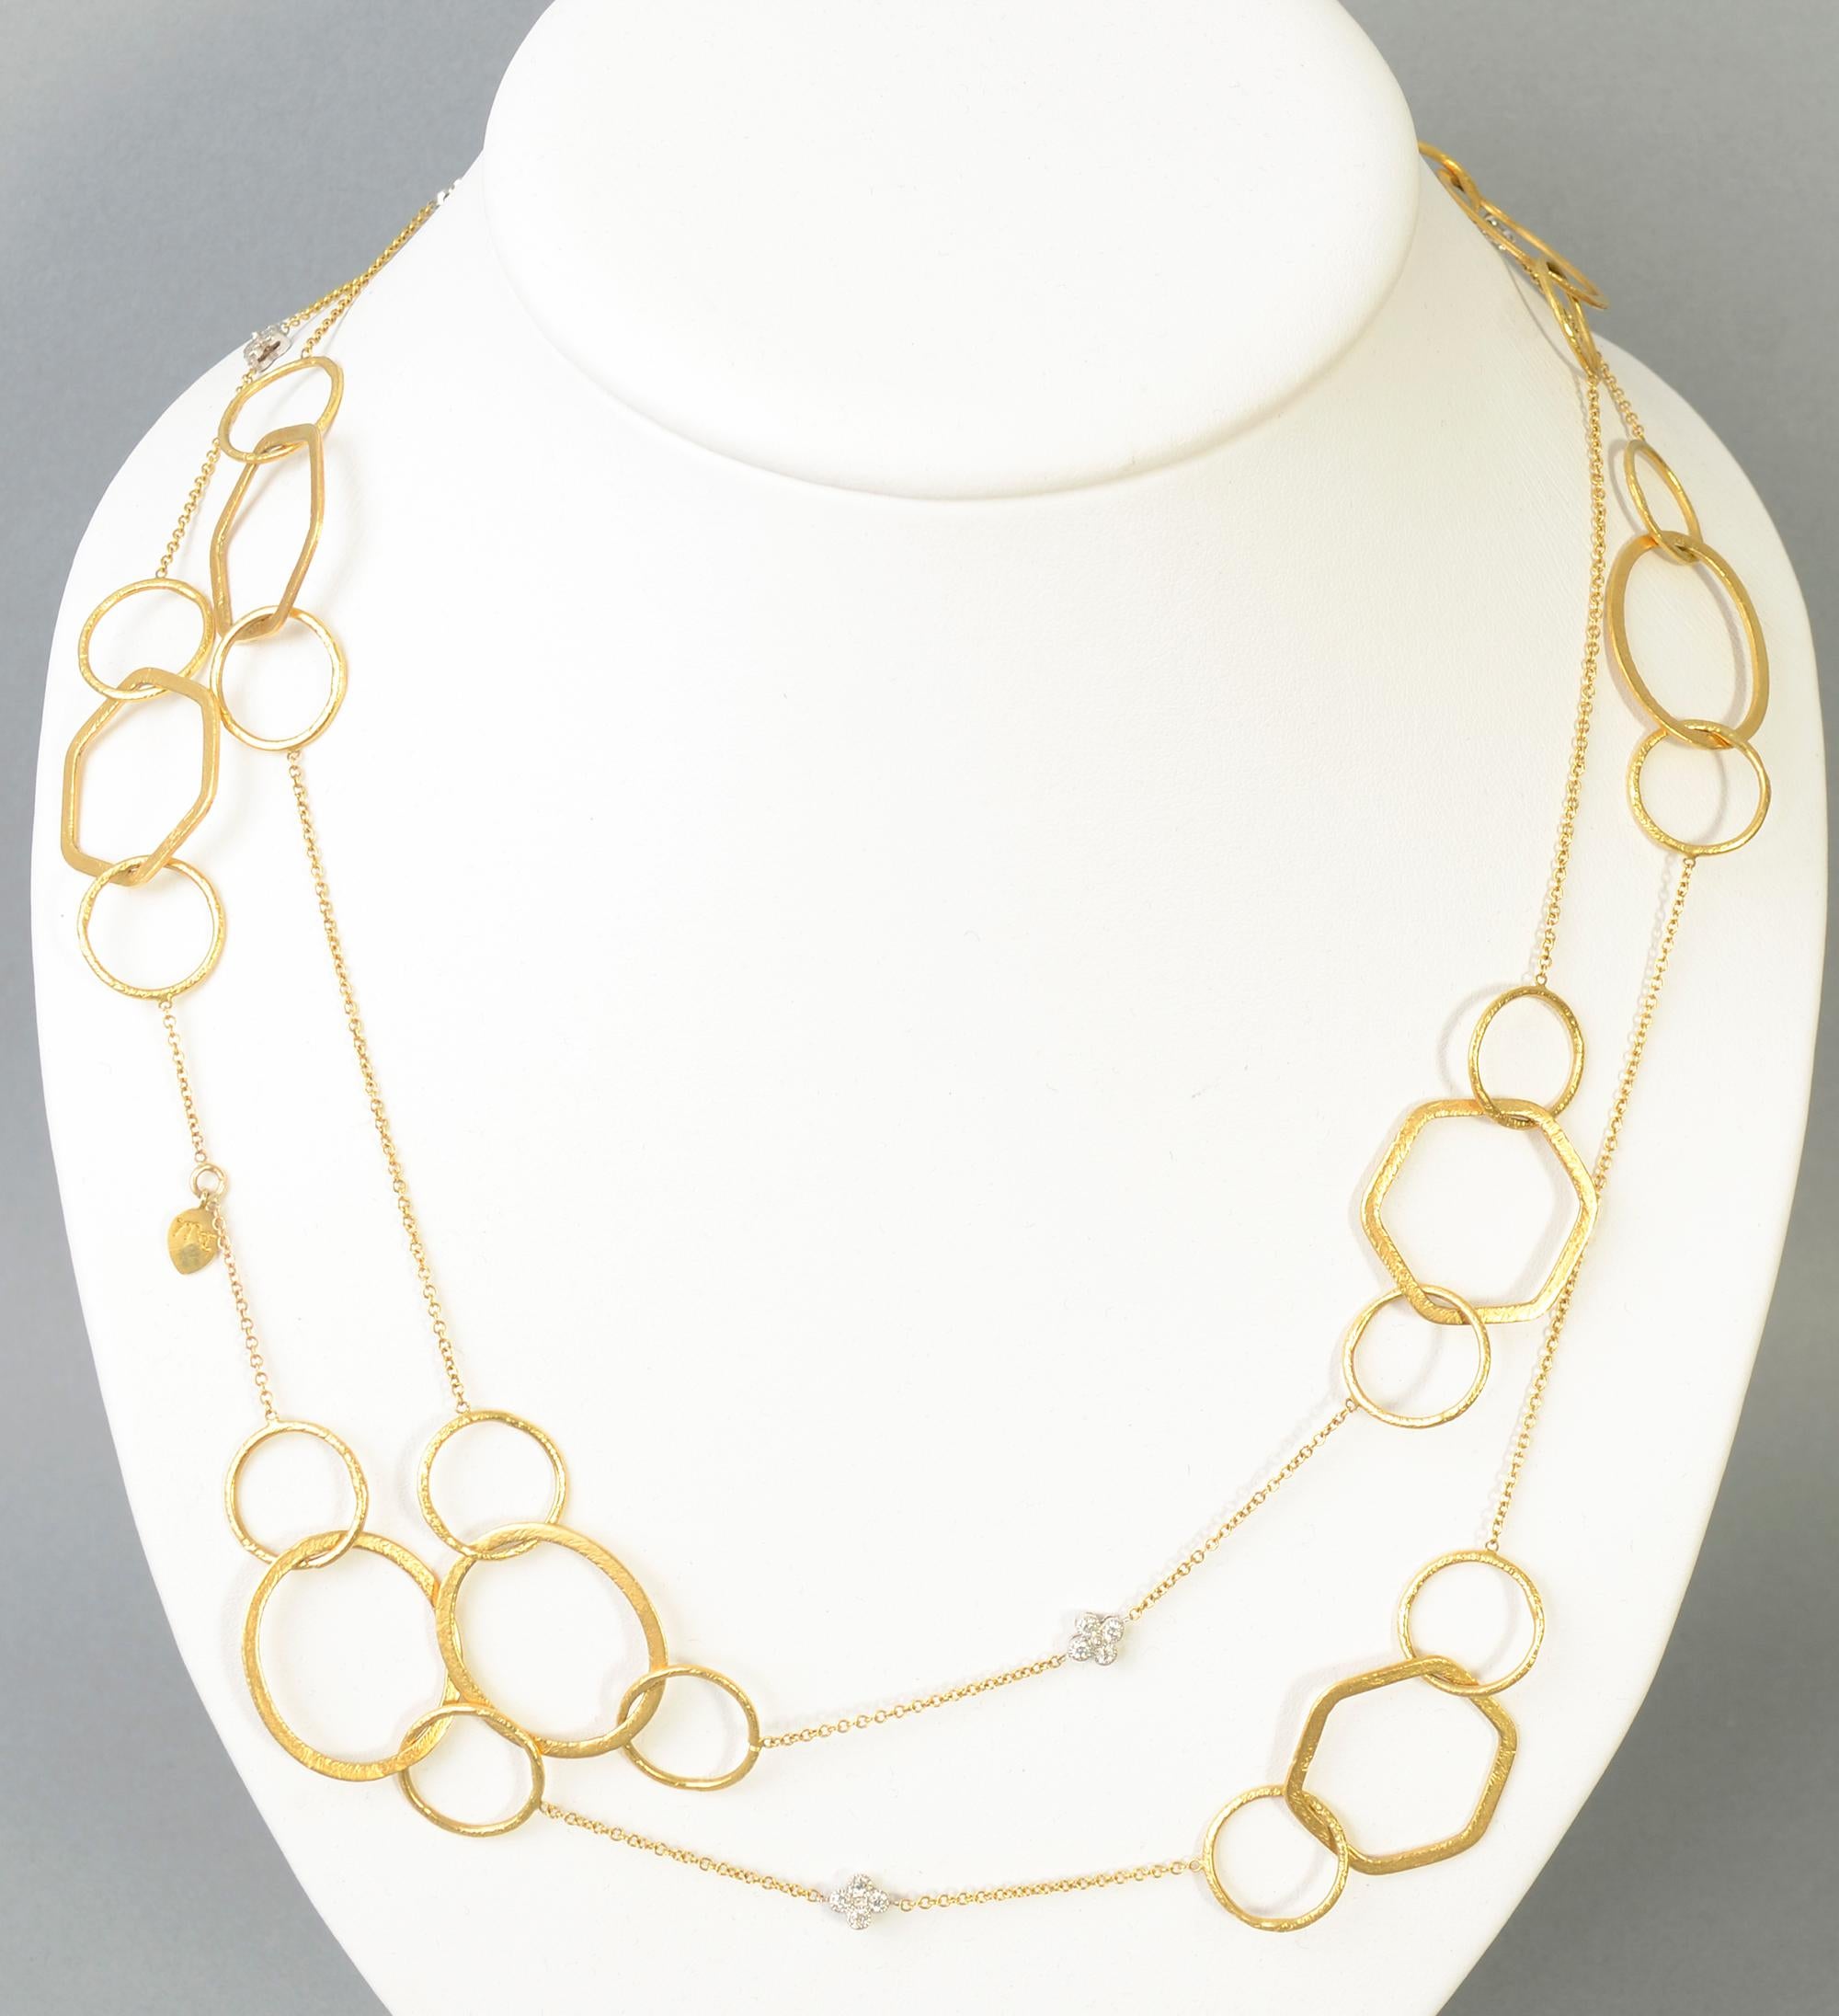 Most interesting and unusual long gold chain necklace with diamonds. The links are round; oval and hexagonal. It has 6 clusters of four diamonds each. The necklace is 52 inches long so it can be worn singly or double. There is no clasp. It has a